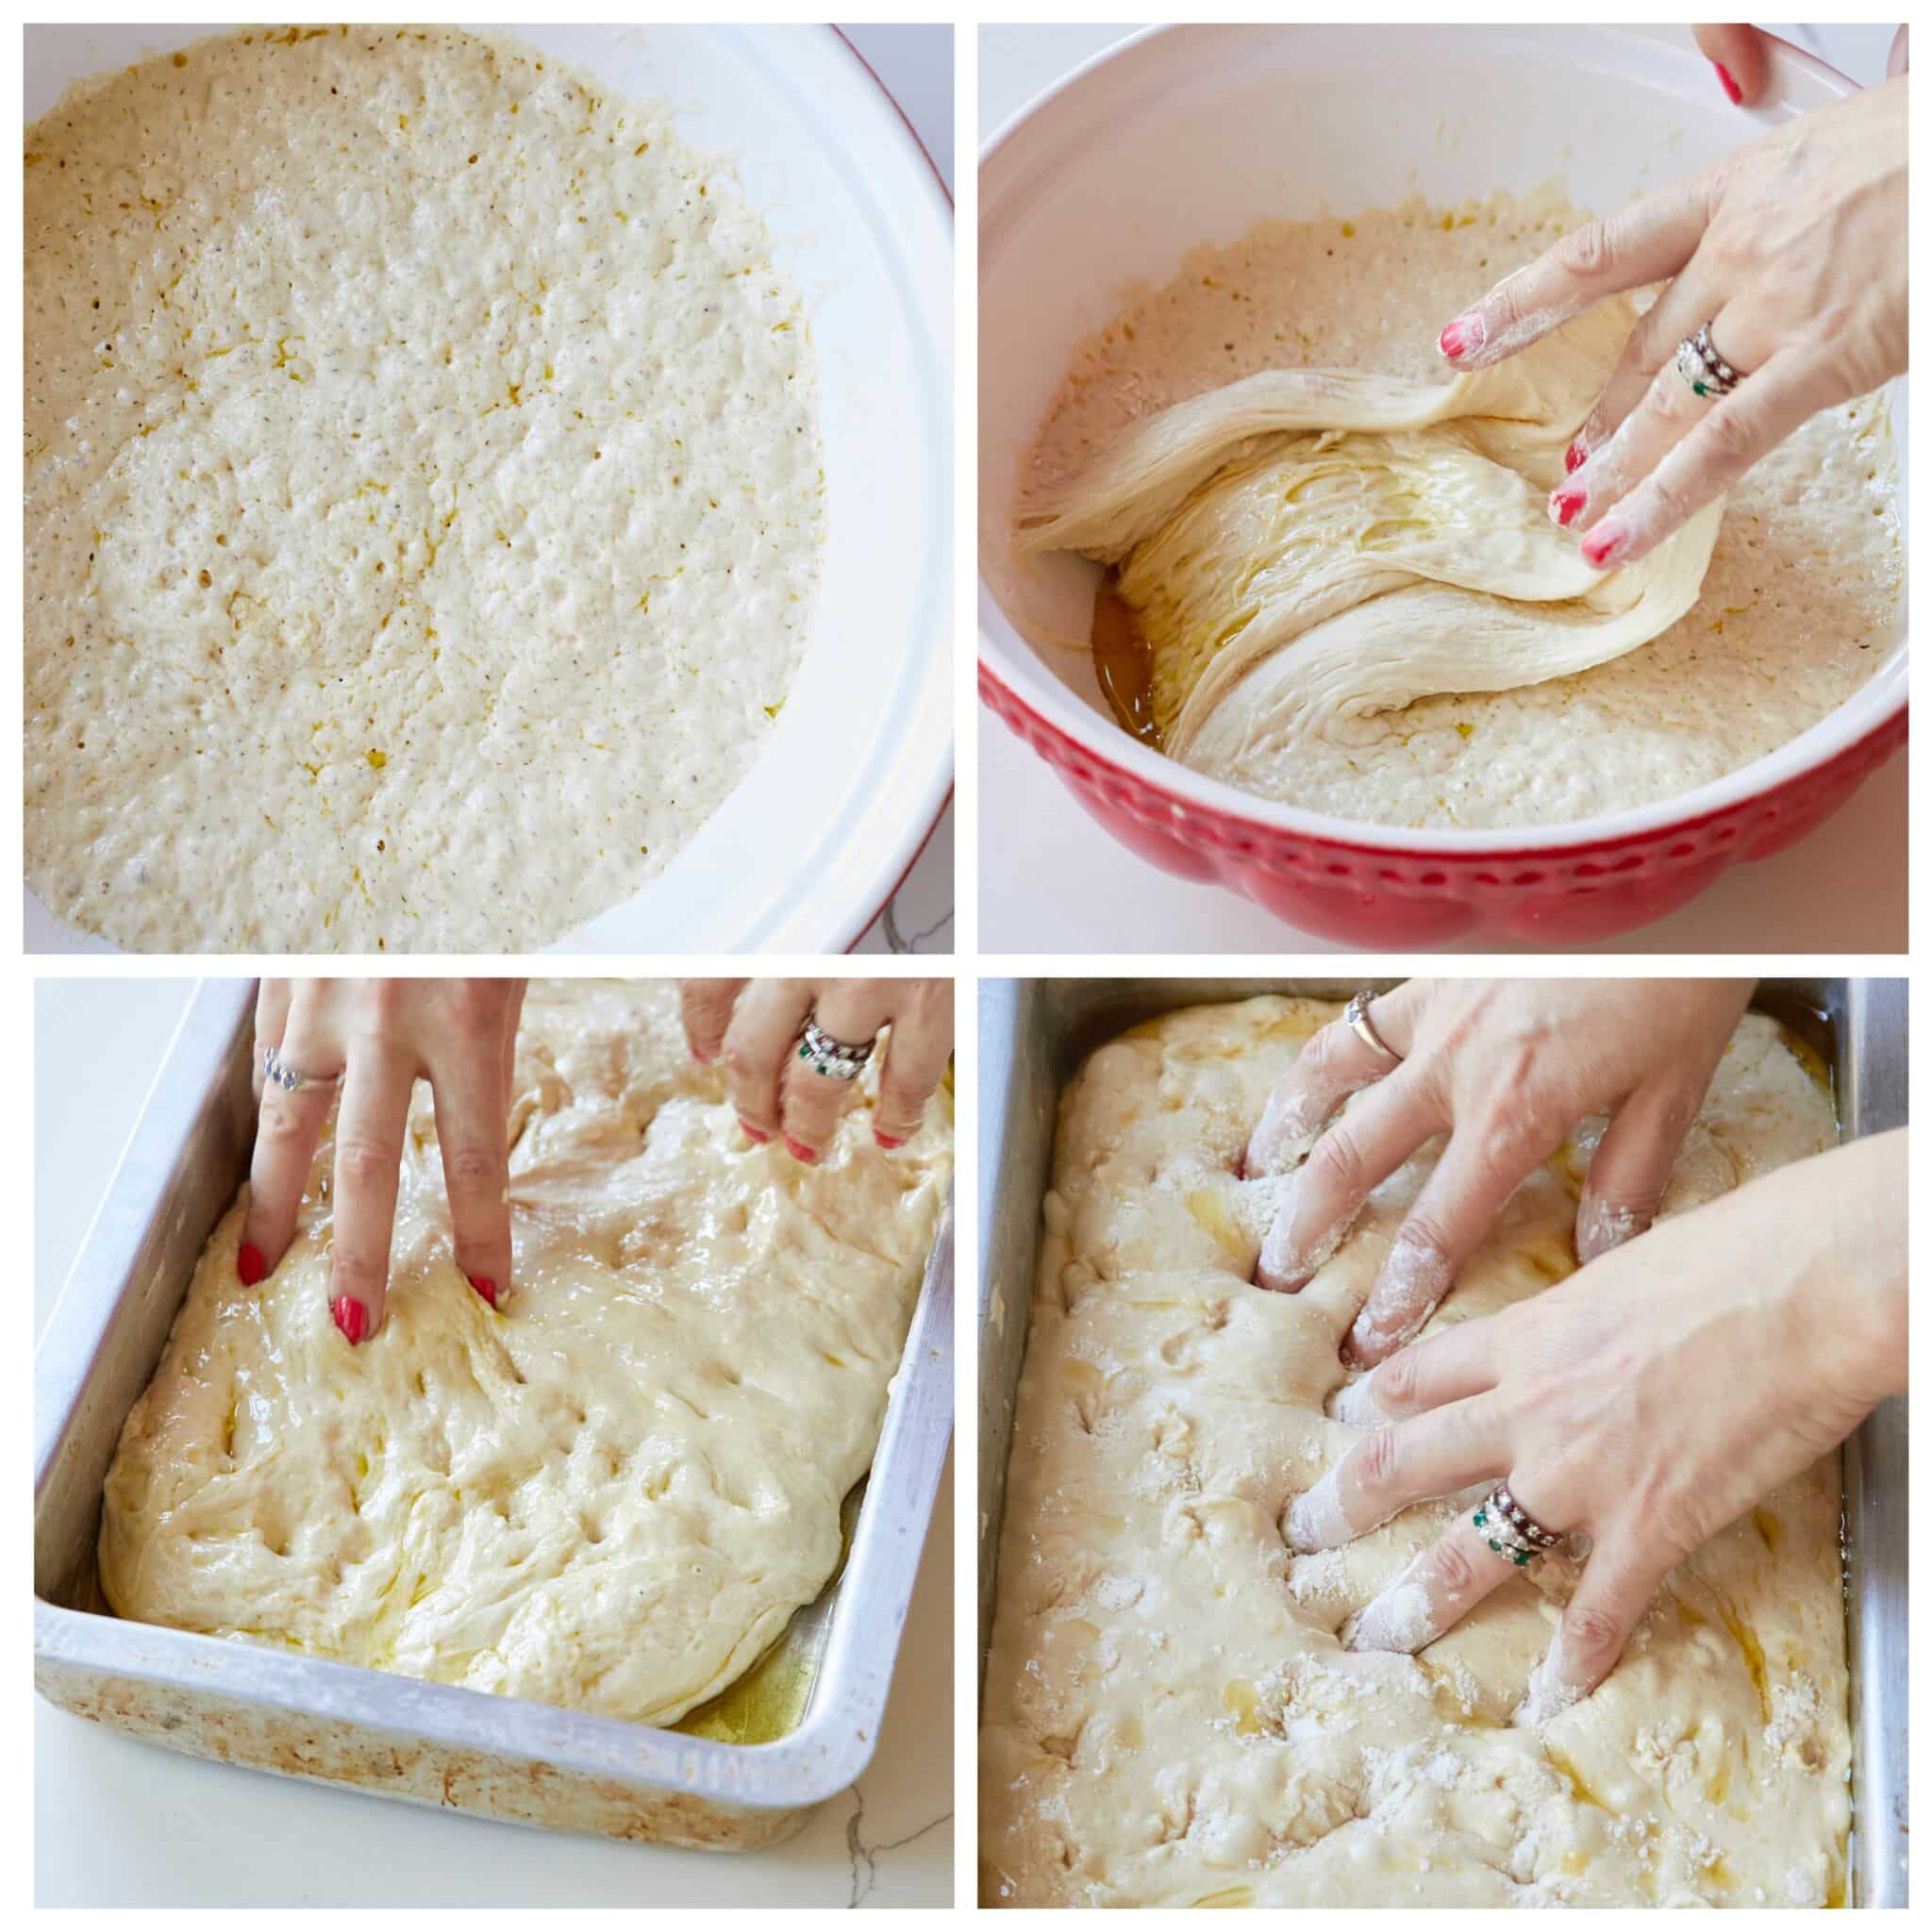 Step-by-step instructions on how to make No-Knead Focaccia: on the second day after bulk fermentation, pull the bubbly dough to the middle of the bowl and push it down to deflate. Put the dough seam-side down into an oiled 9x13-inch (22x33 cm) baking tray. Before baking, rub olive oil on your hands and make deep dimples all over the dough. 